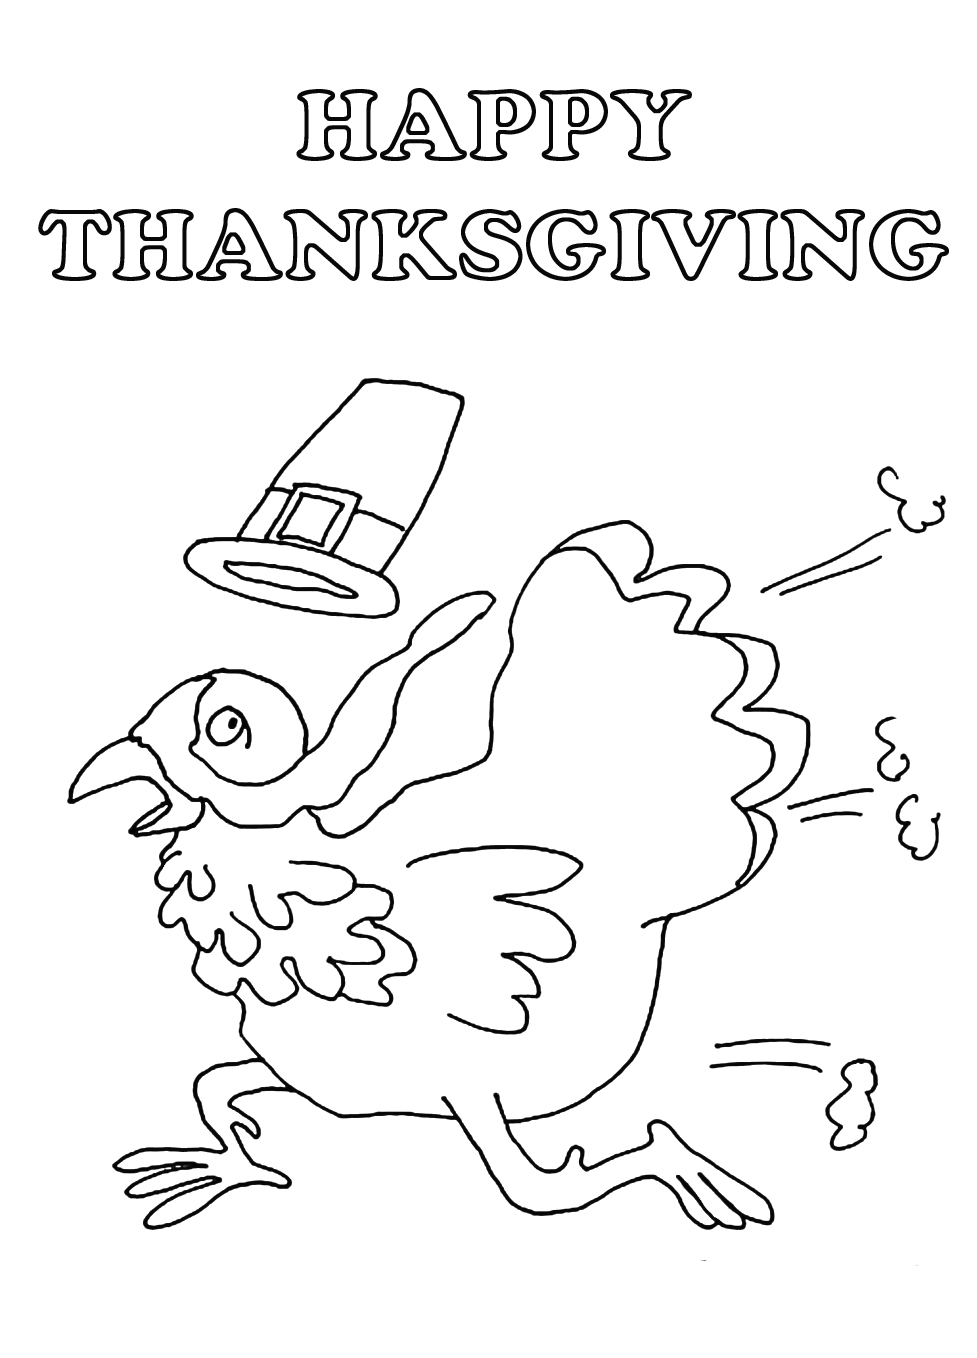 Thanksgiving coloring pages with running turkey bird